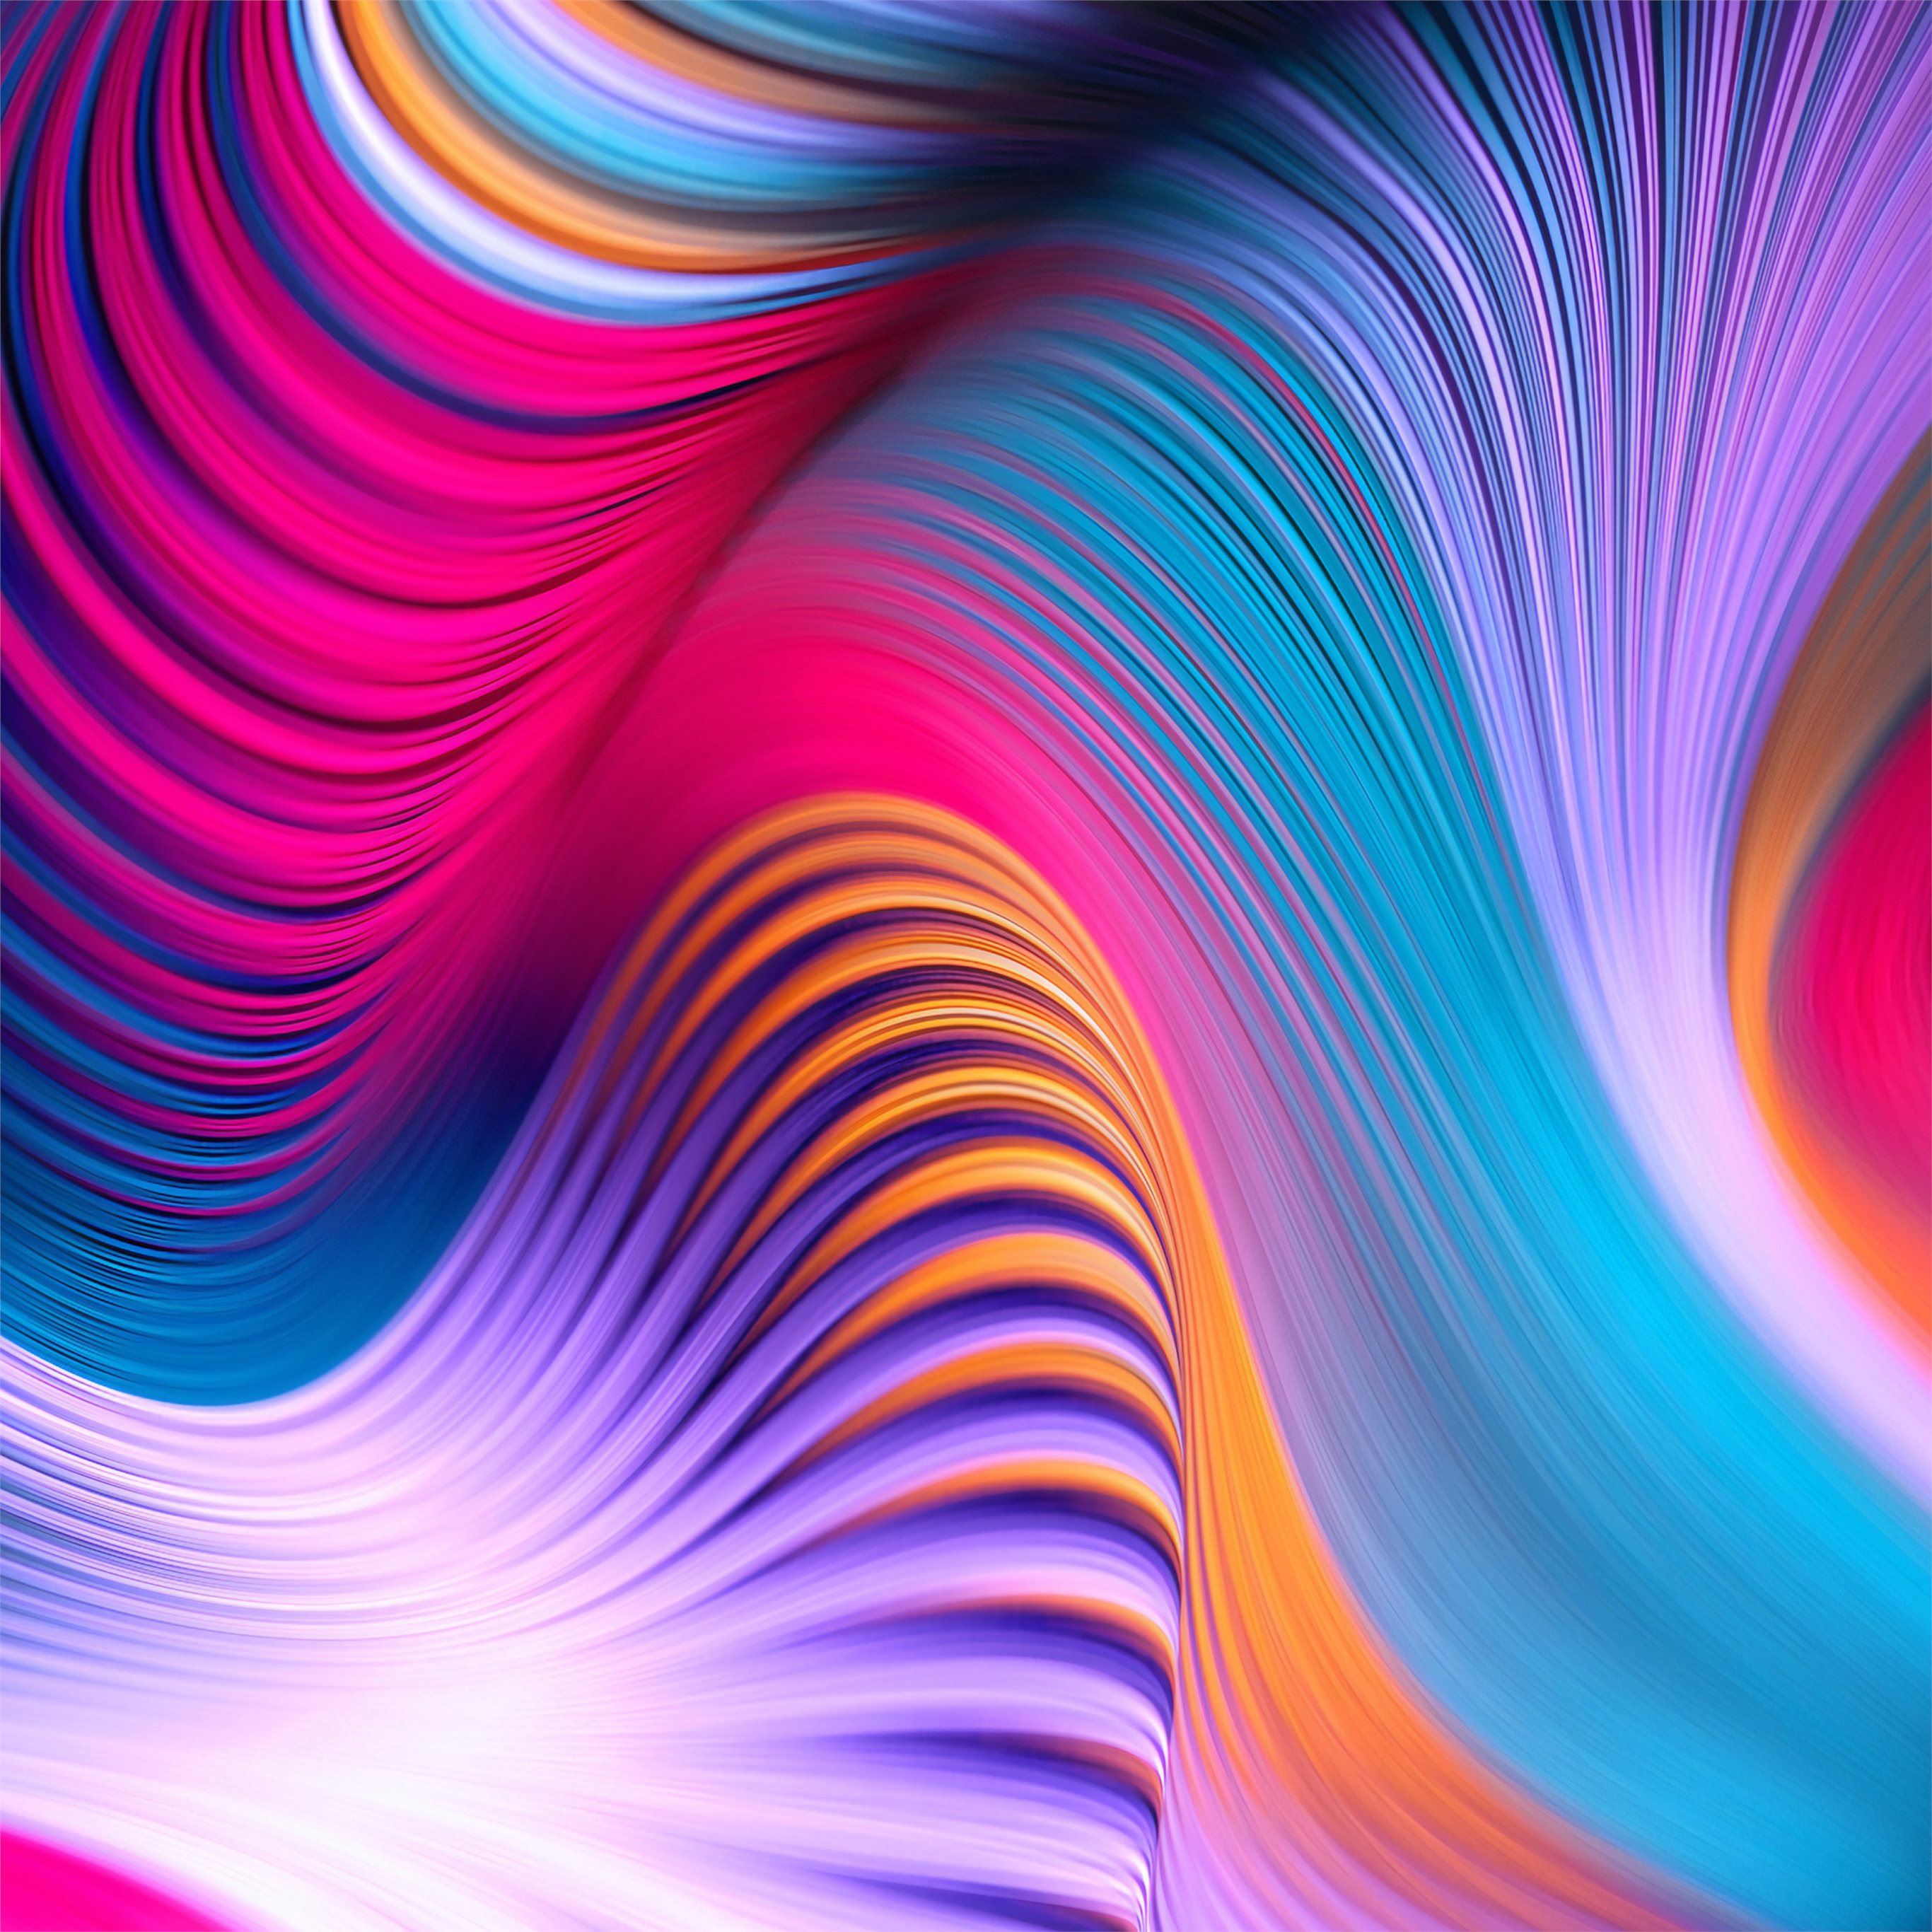 colorful movements of abstract art 4k iPad Pro Wallpapers Free Download